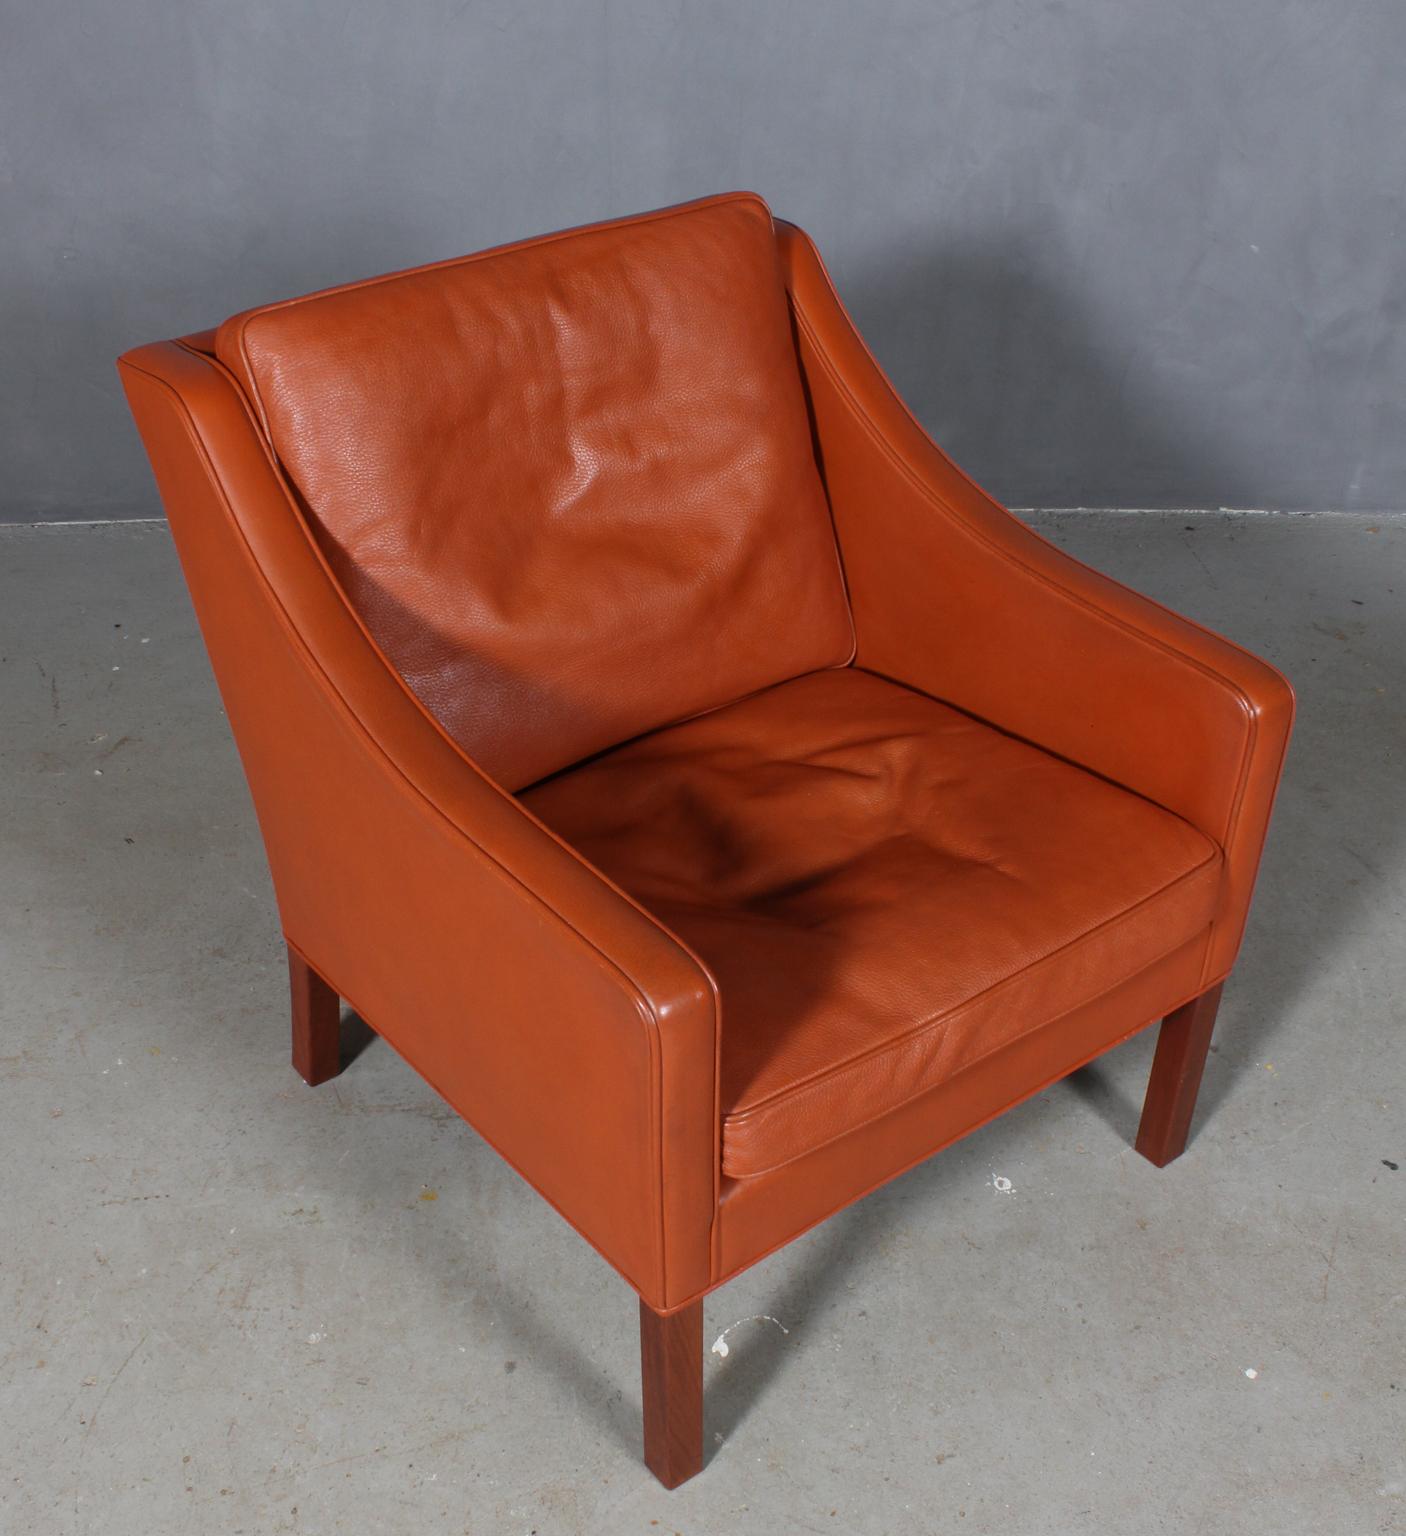 Børge Mogensen lounge chair with original leather upholstery.

Legs of teak.

Model 2207, made by Fredericia furniture.